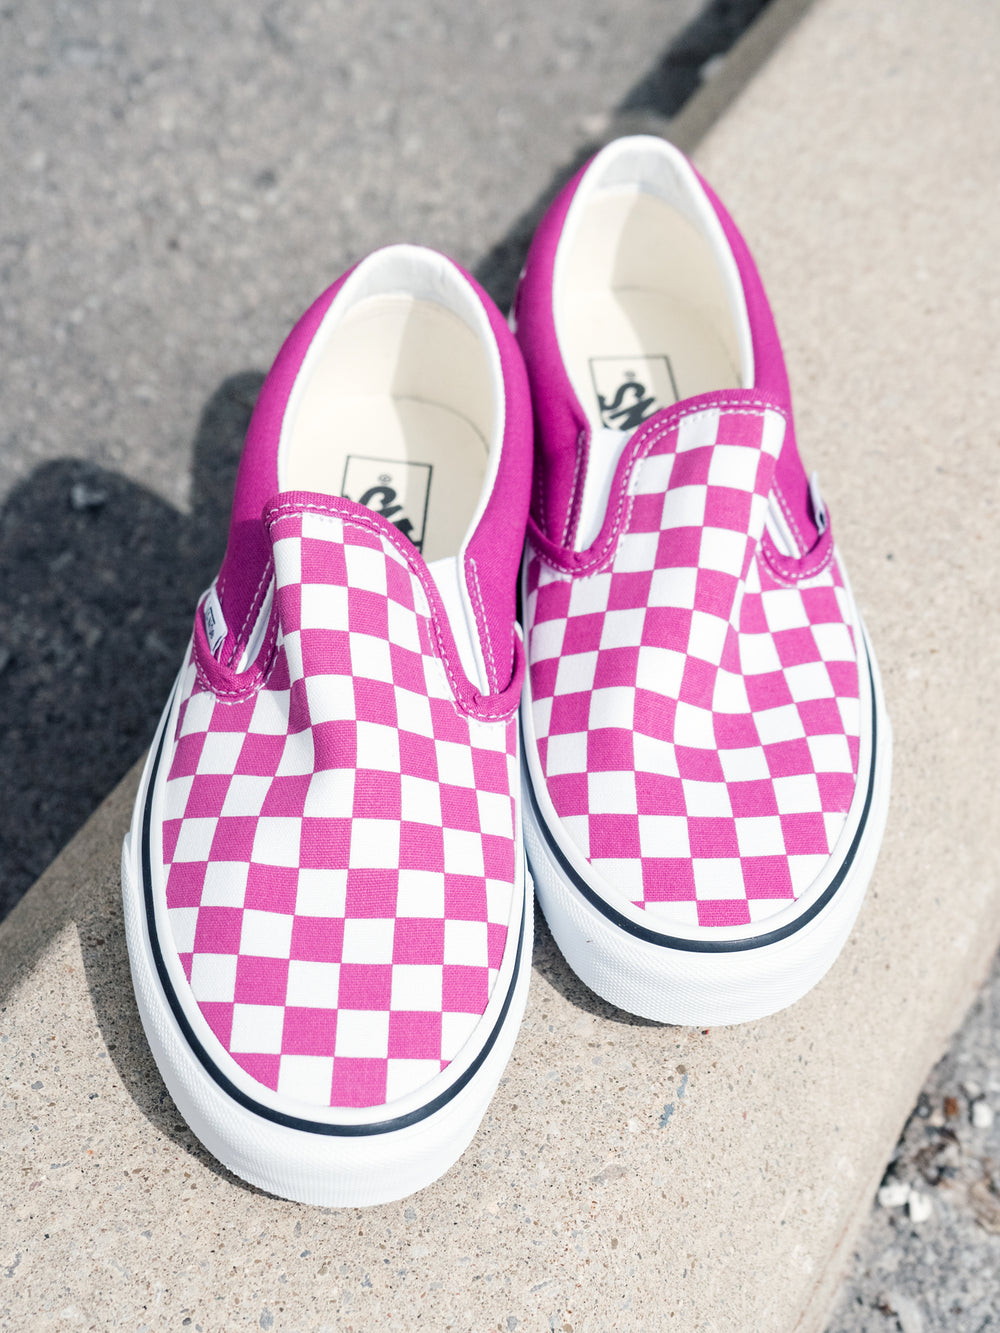 WOMENS VANS CLASSIC SLIP ON CHECKER FUCHSIA R SNEAKER - CLEARANCE |  Boathouse Footwear Collective